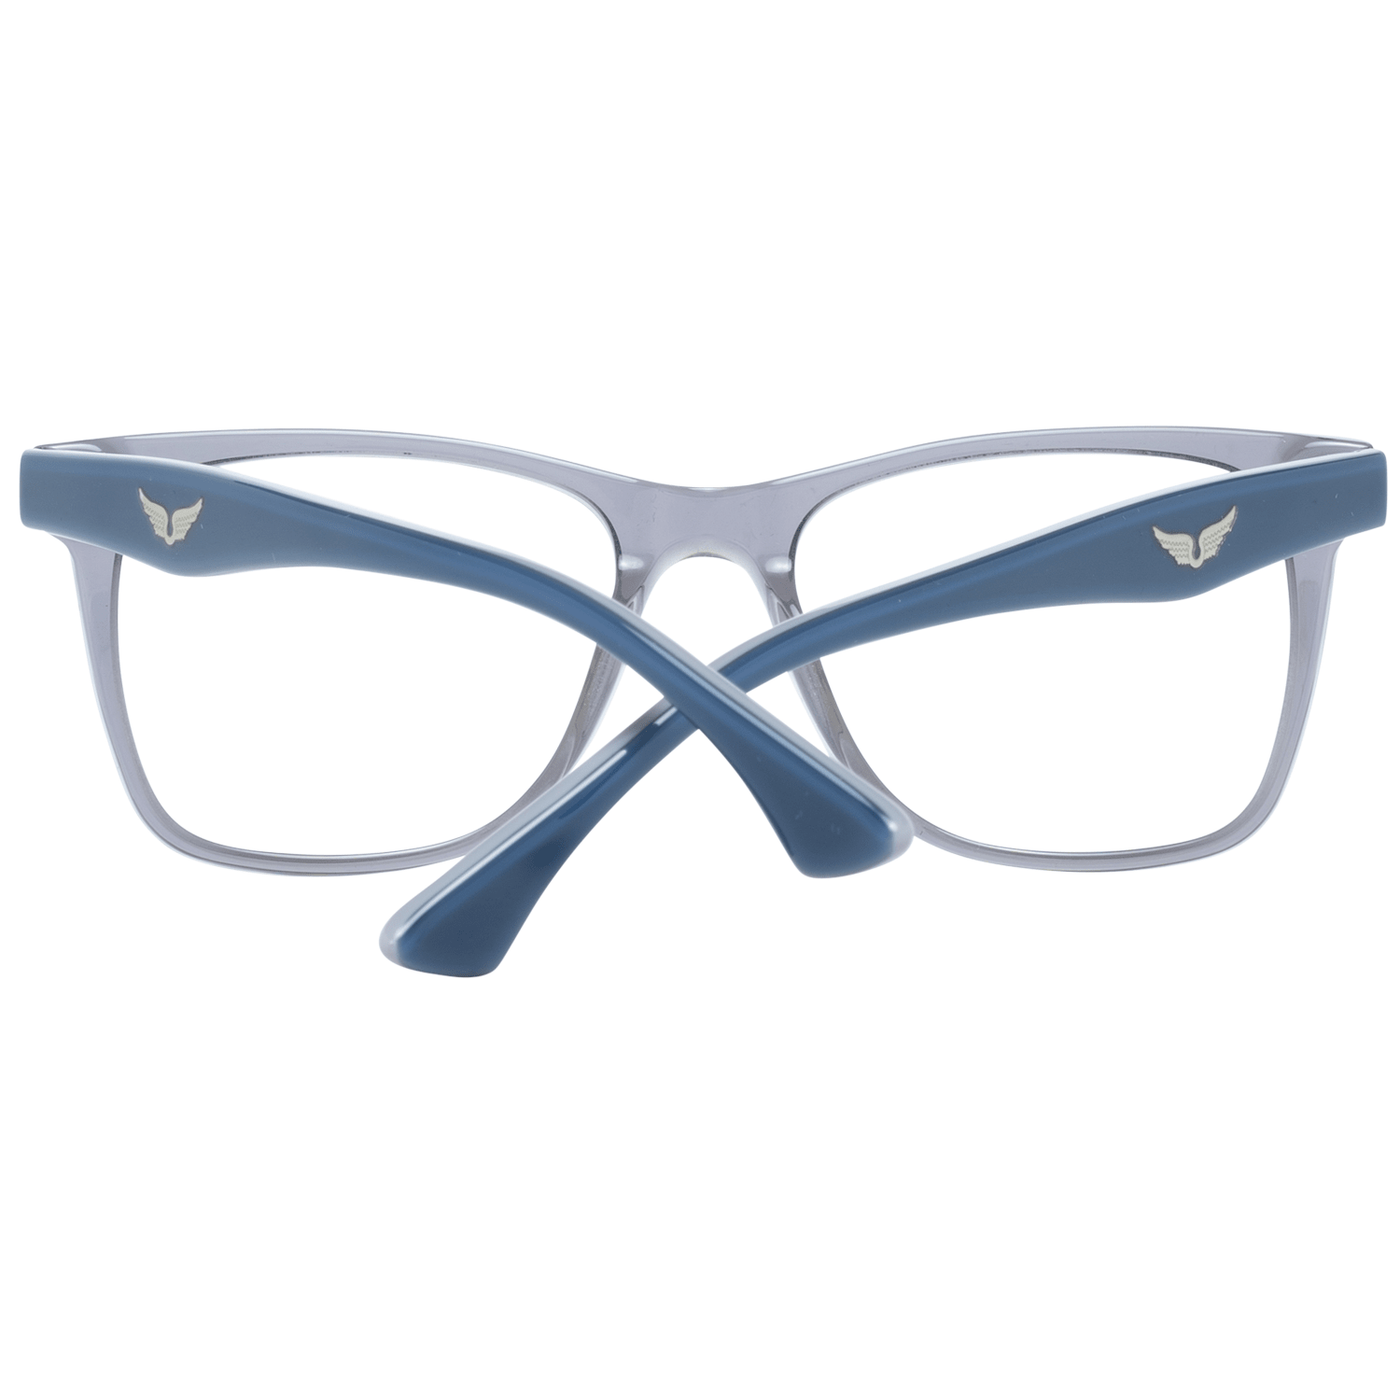 Zadig & Voltaire Gray Unisex Optical Frames